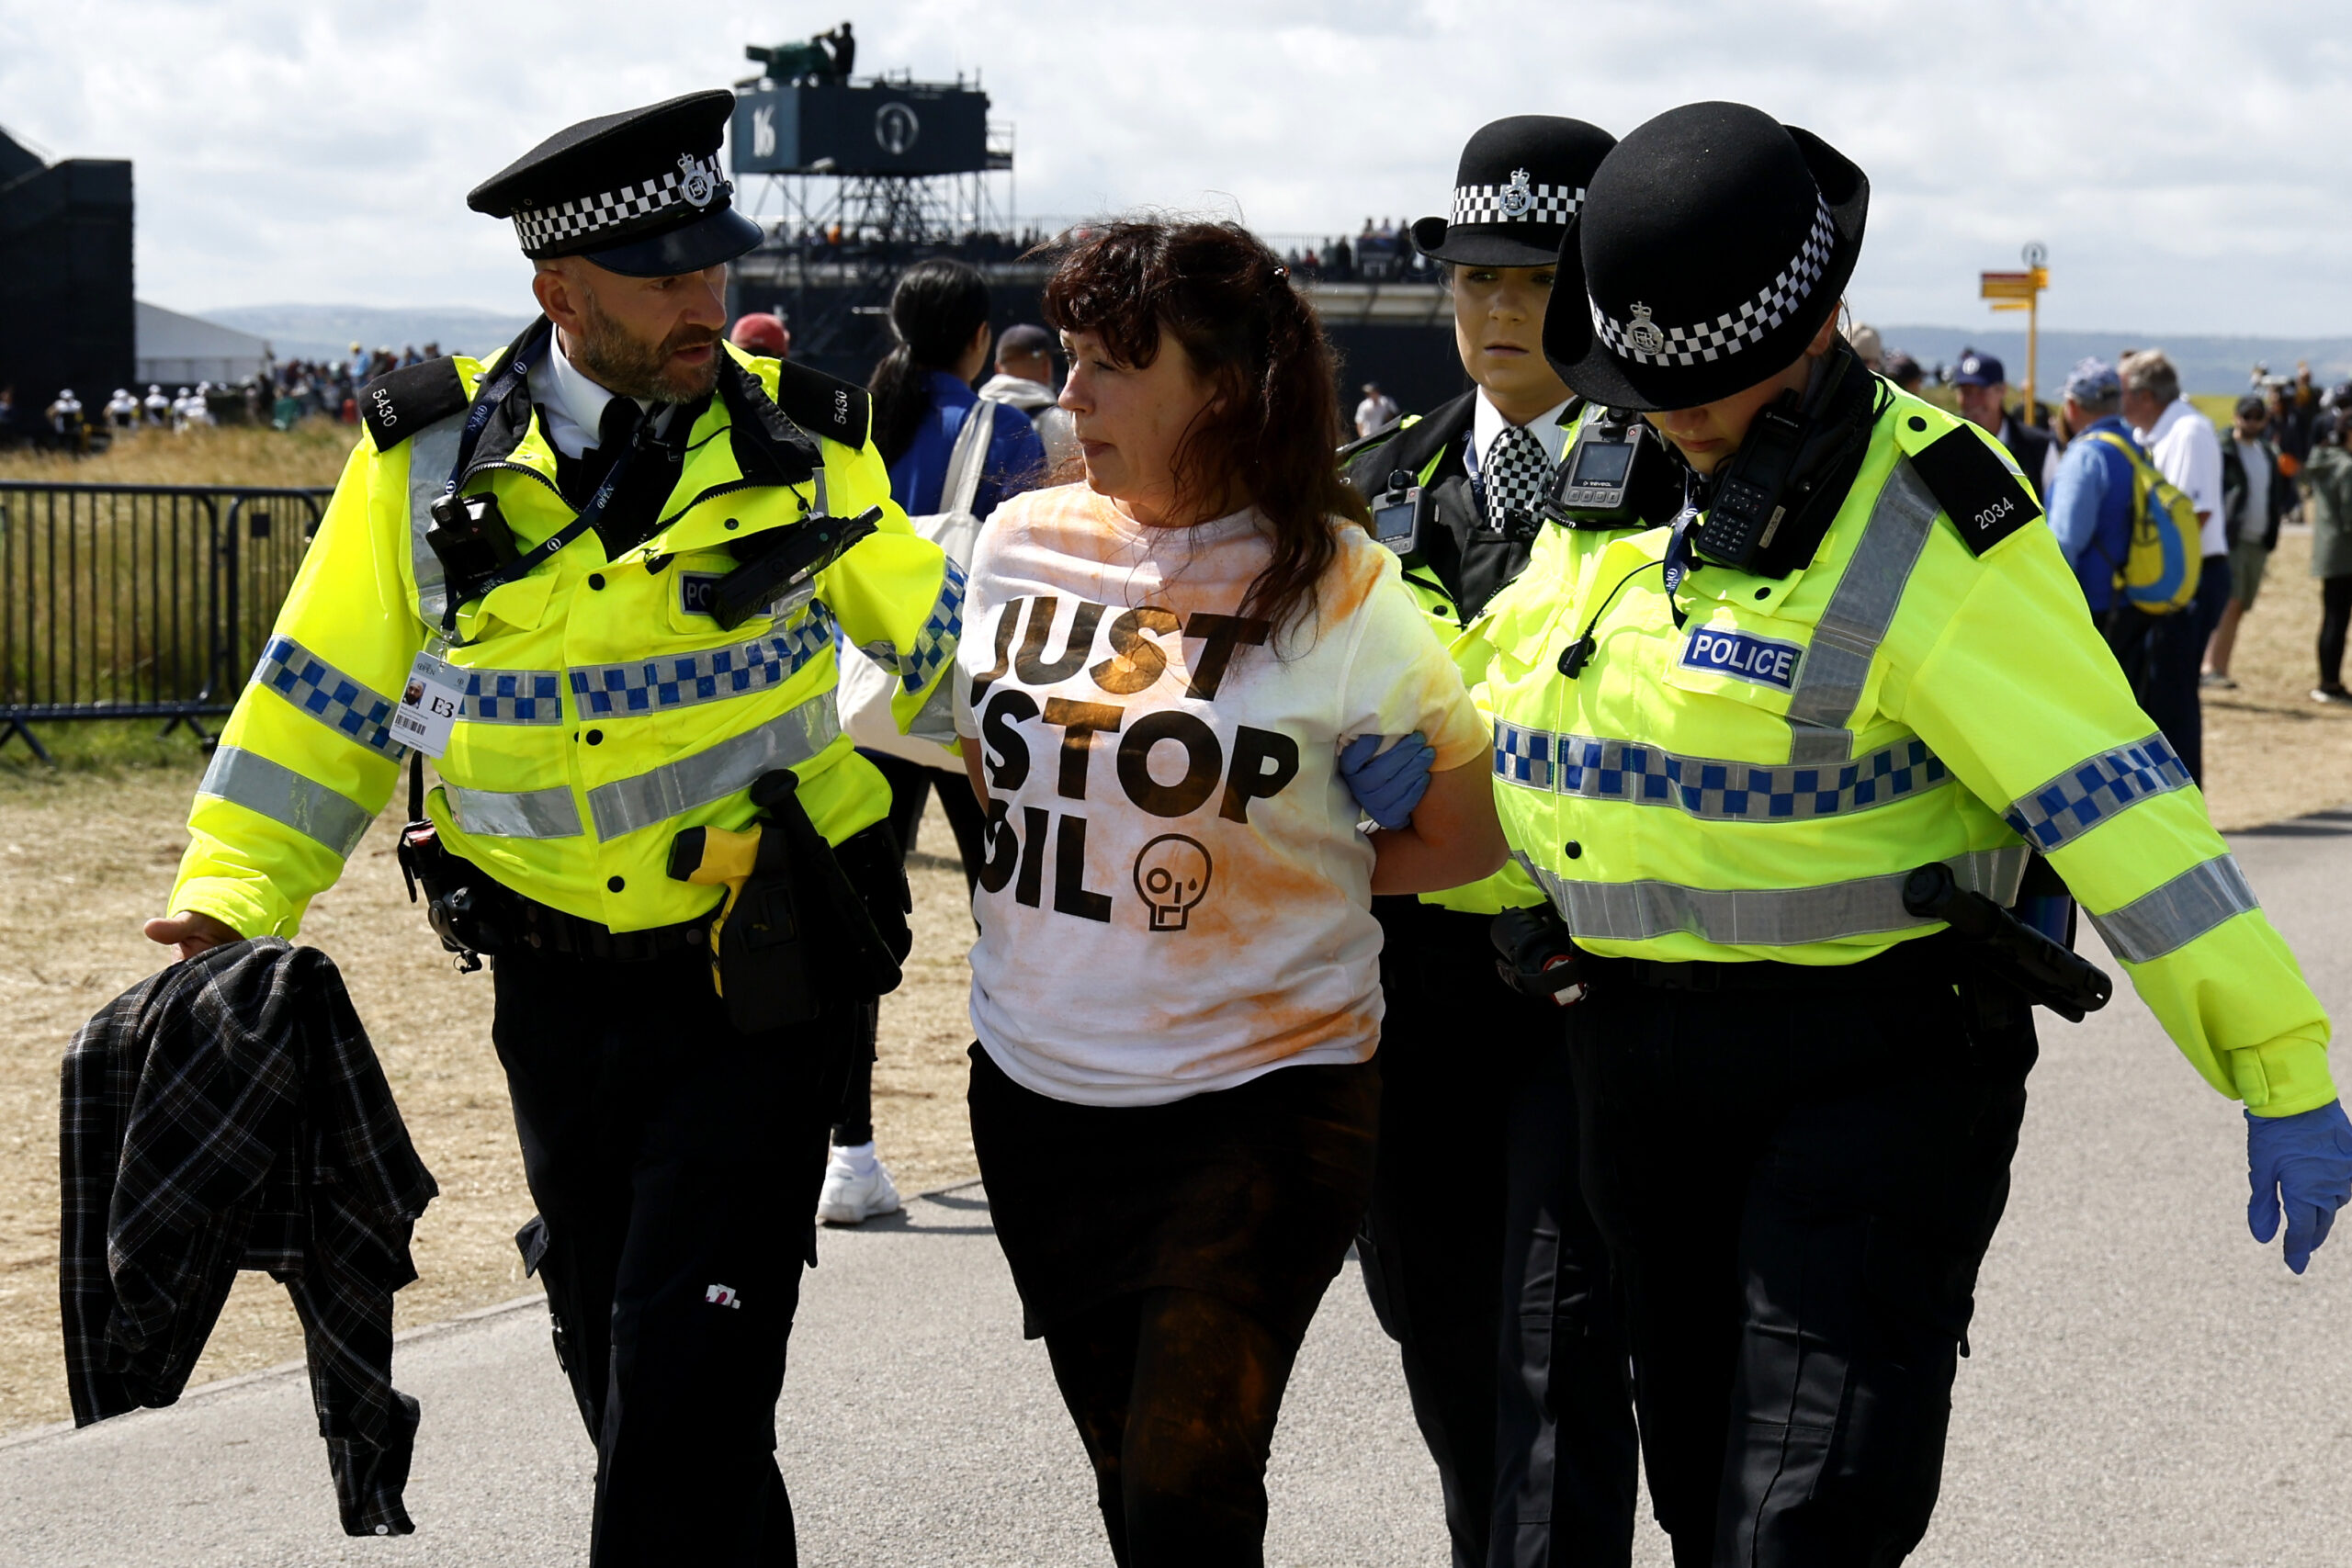 A Just Stop Oil protester is taken away by police